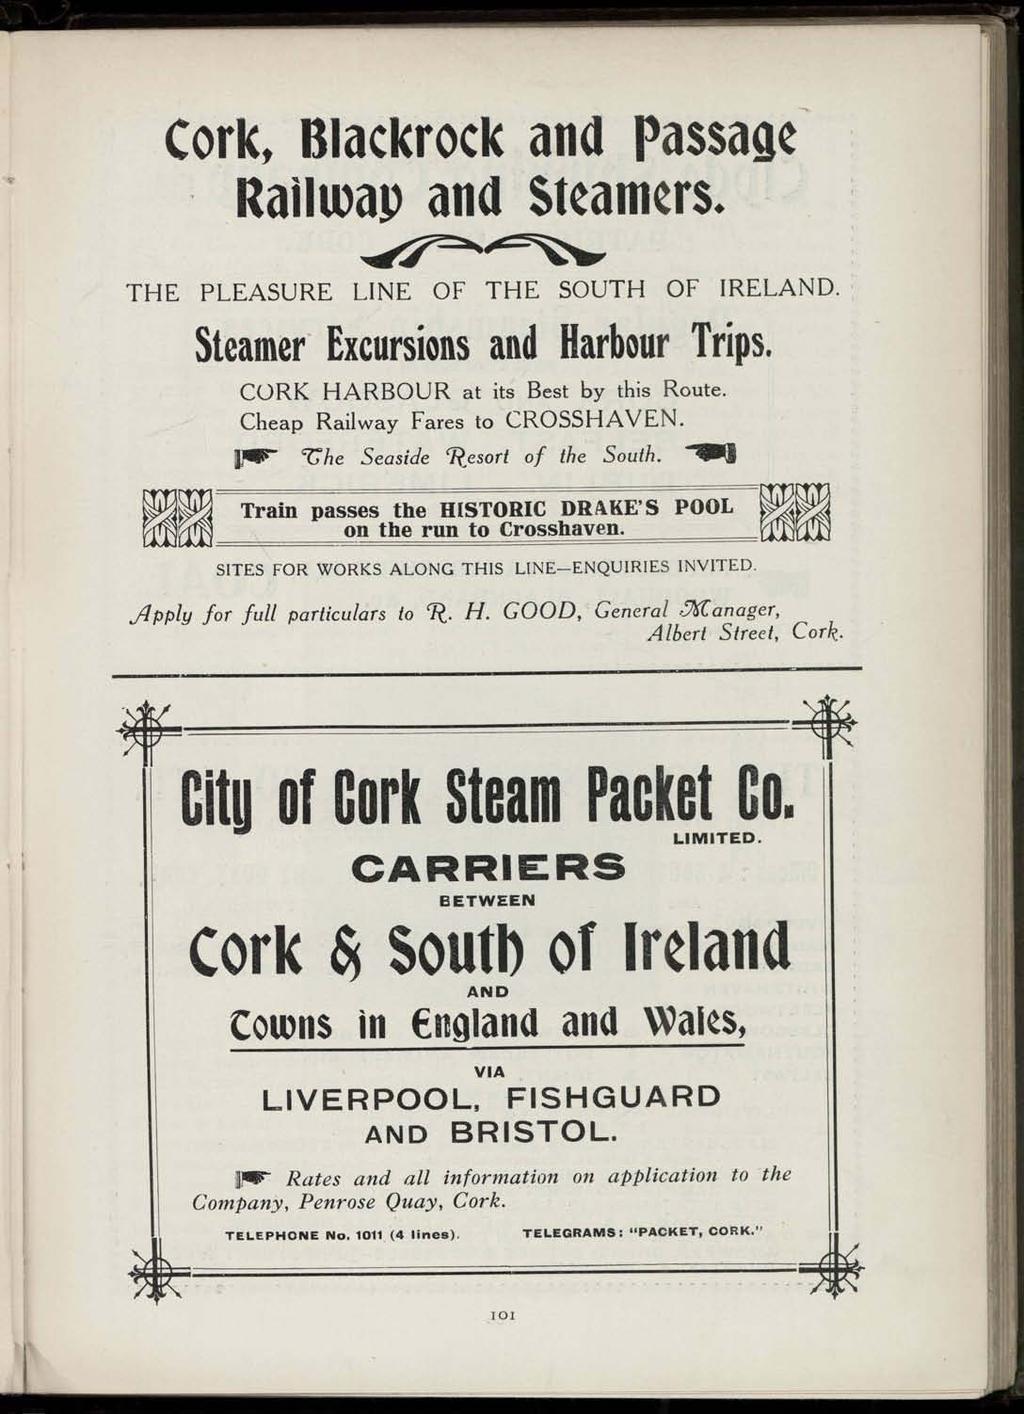 Cork, Blackrock and Passage Raiiiuap and Steamers. THE PLEASURE LINE OF T HE SOUTH OF IRELAND. Steamer Excursions and Harbour Trips. CORK HARBOUR at its Best by this Route.